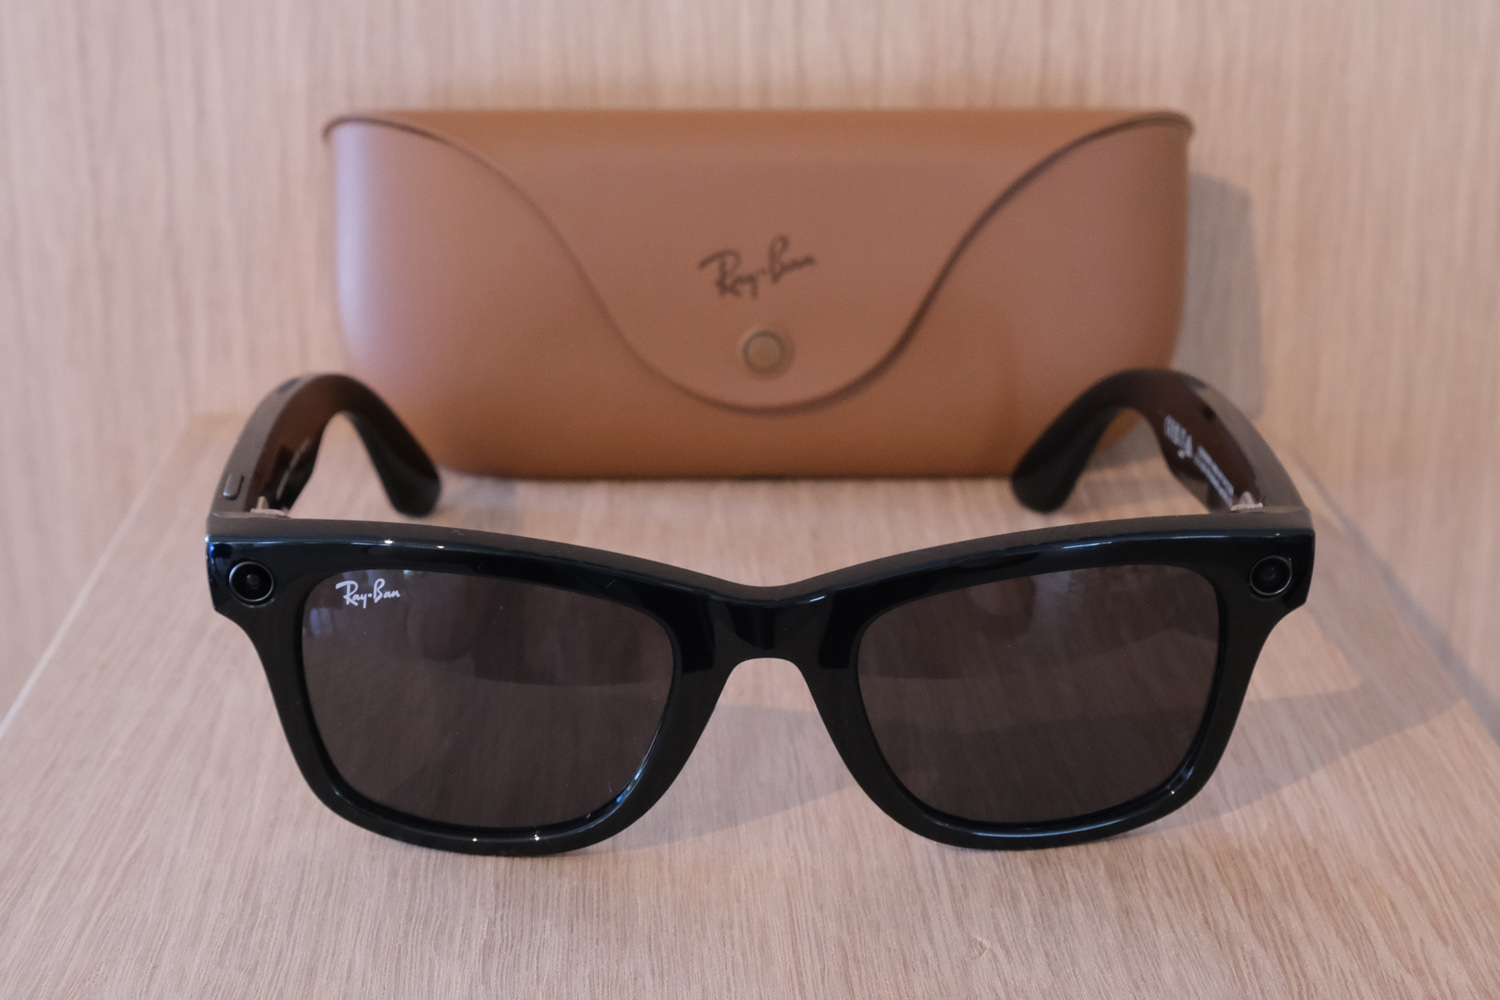 Ray-Ban Stories Smart Sunglasses Review